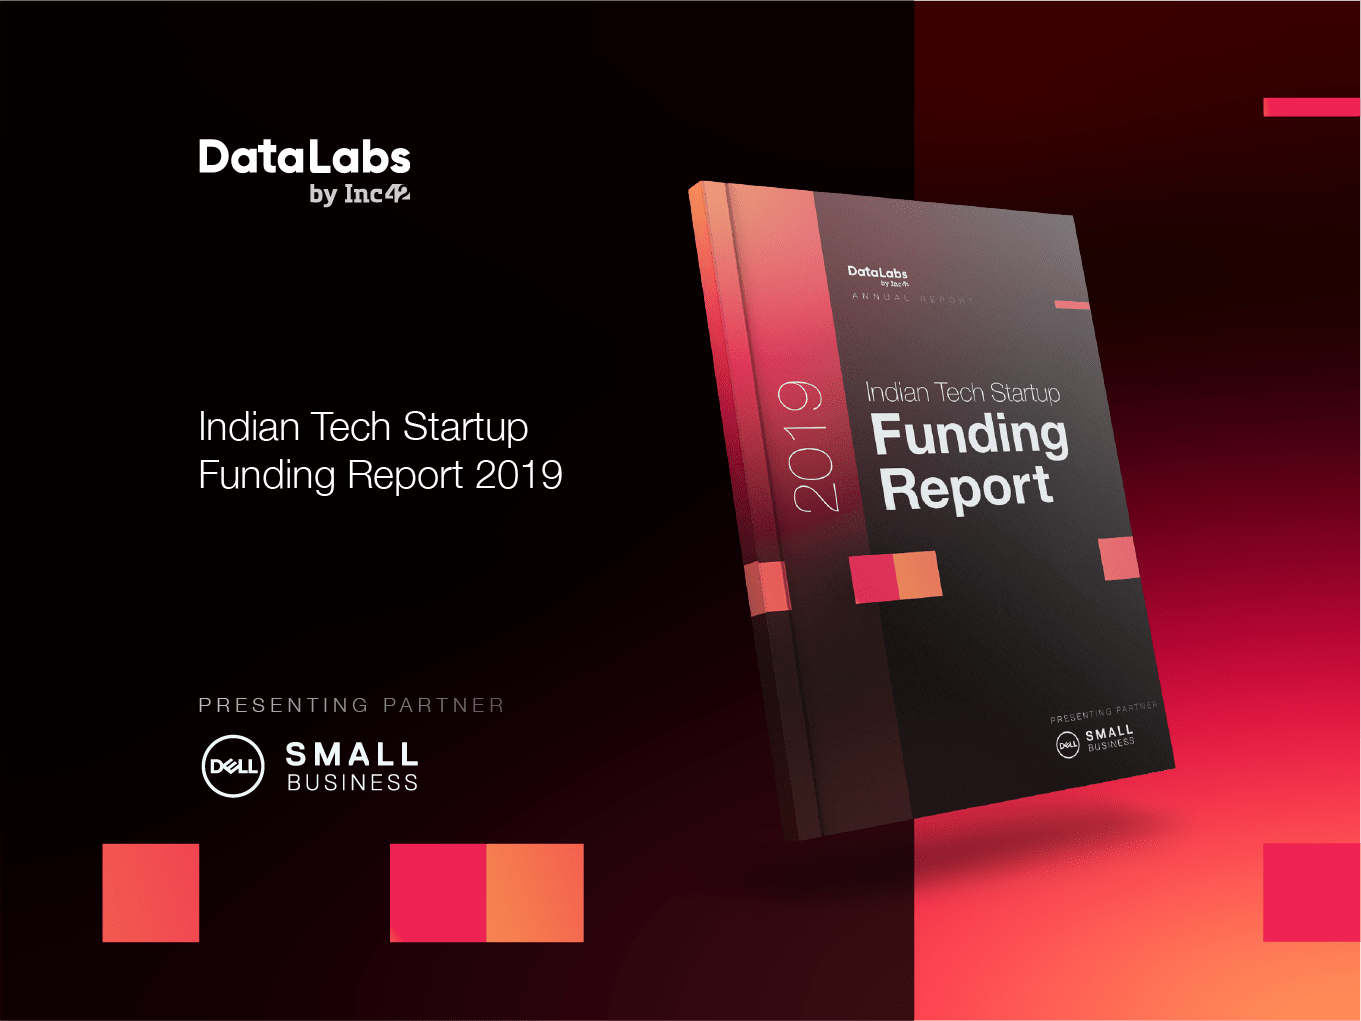 DataLabs By Inc42's Indian Tech Startup Funding Report Card For 2019